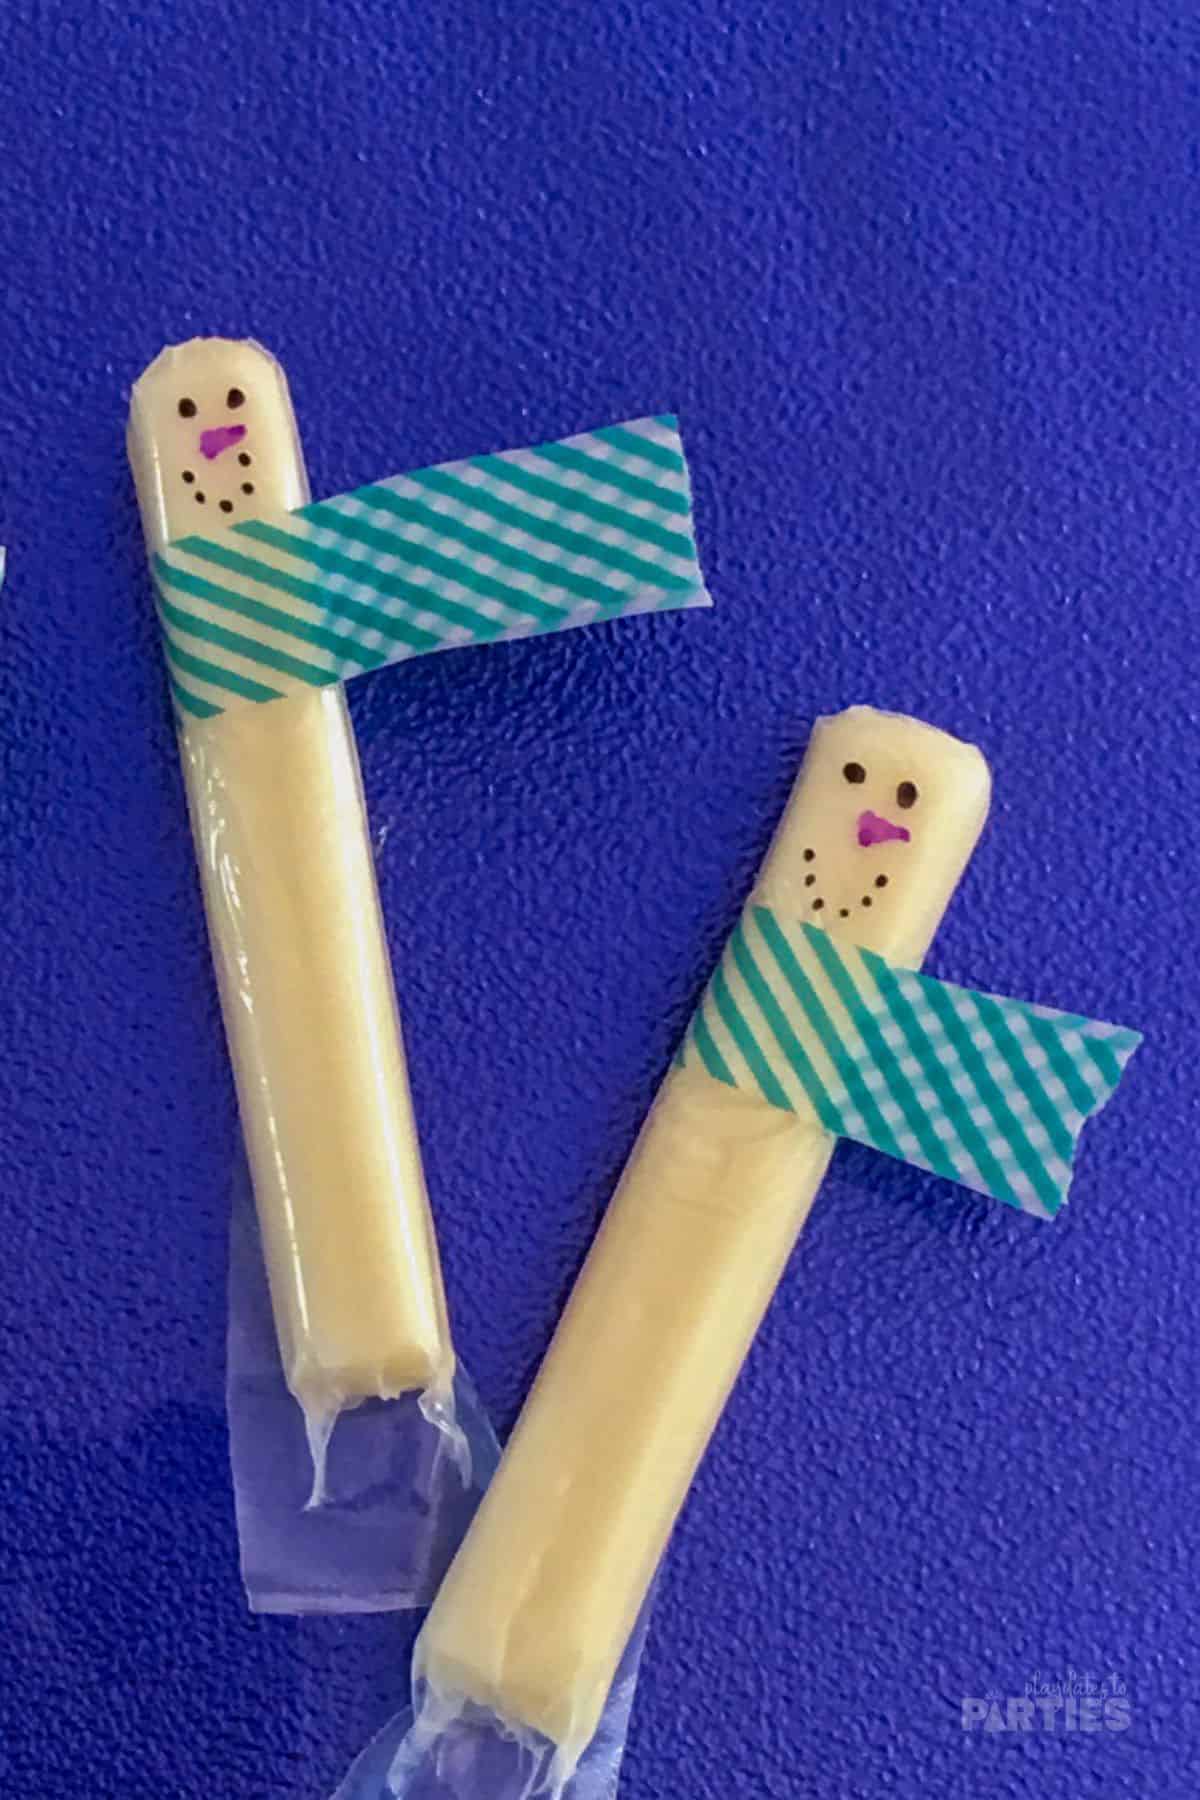 It doesn't matter if it's warm or cold outside, your kids will love eating these cheese stick snowman snacks. And they only take a few minutes to make!